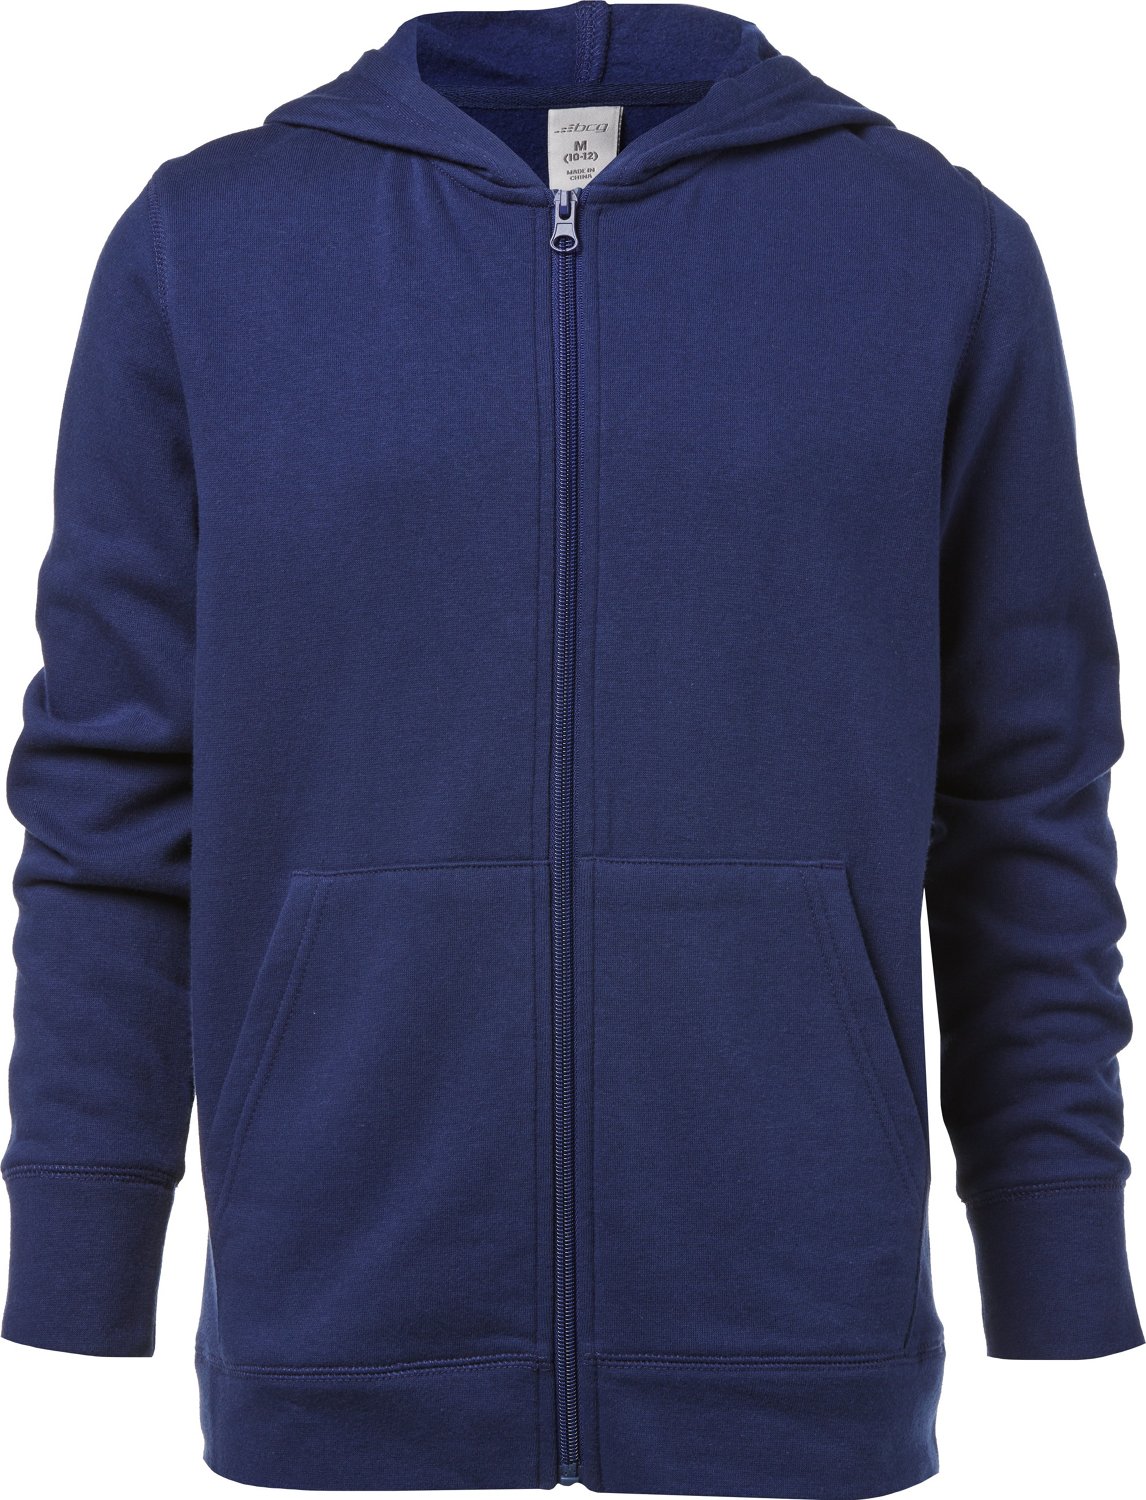 BCG Boys’ Lifestyle Cotton Fleece Jacket                                                                                       - view number 1 selected